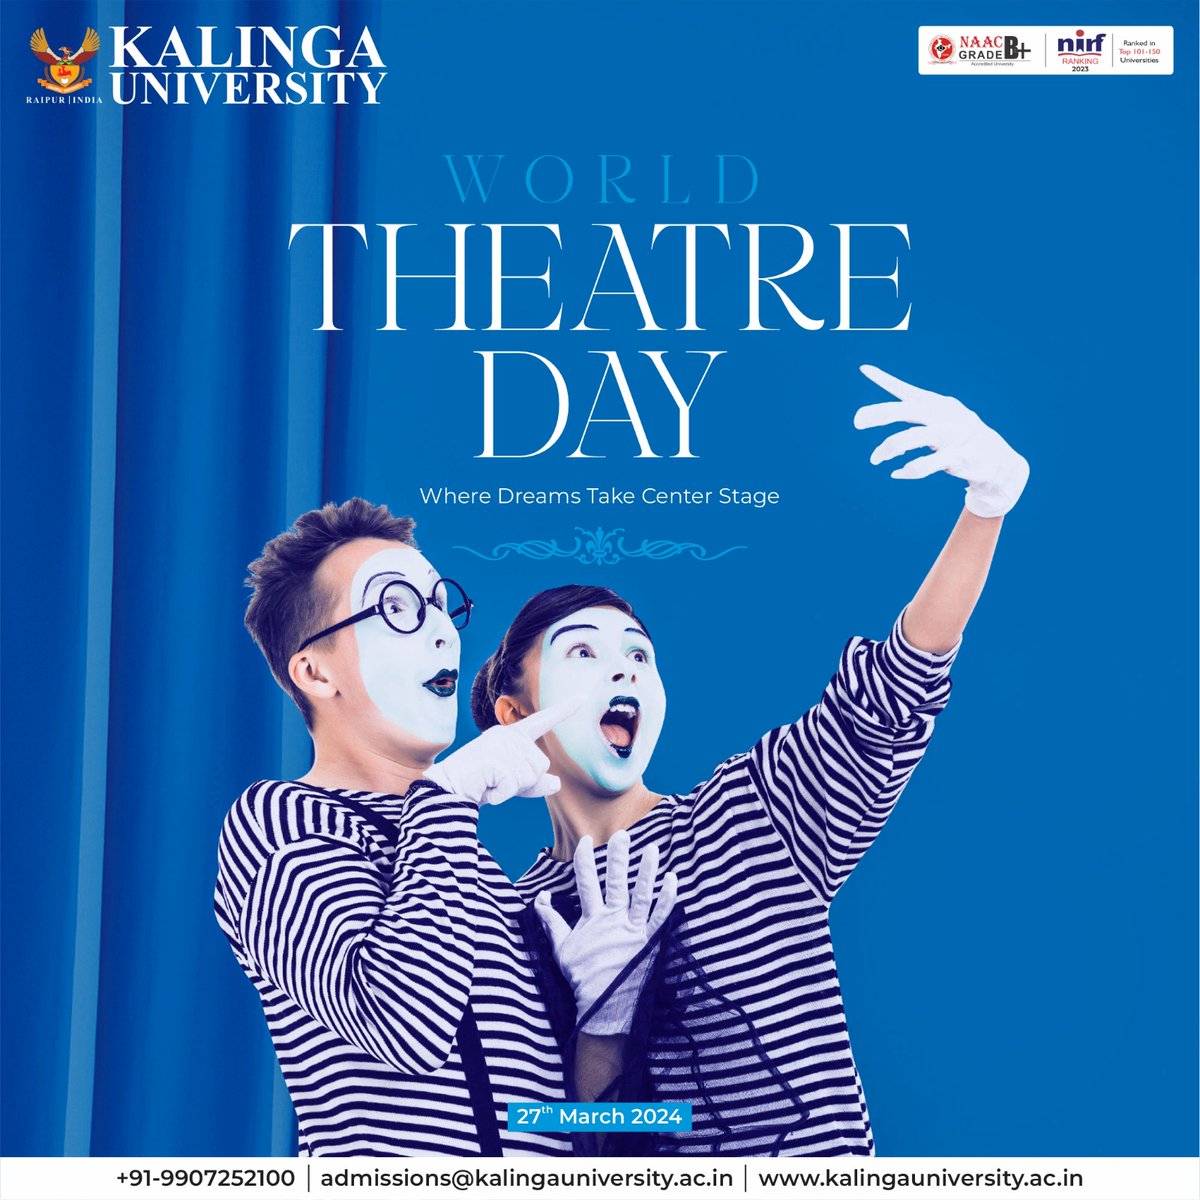 On this World Theatre Day, let us celebrate the creativity, passion & hard work of every individual who bring stories to life on stage. Let's continue to appreciate and support the magic of theatre & the arts. #WorldTheatreDay #Cinema #TheatreDay #Theatre #artist #IndianCinema